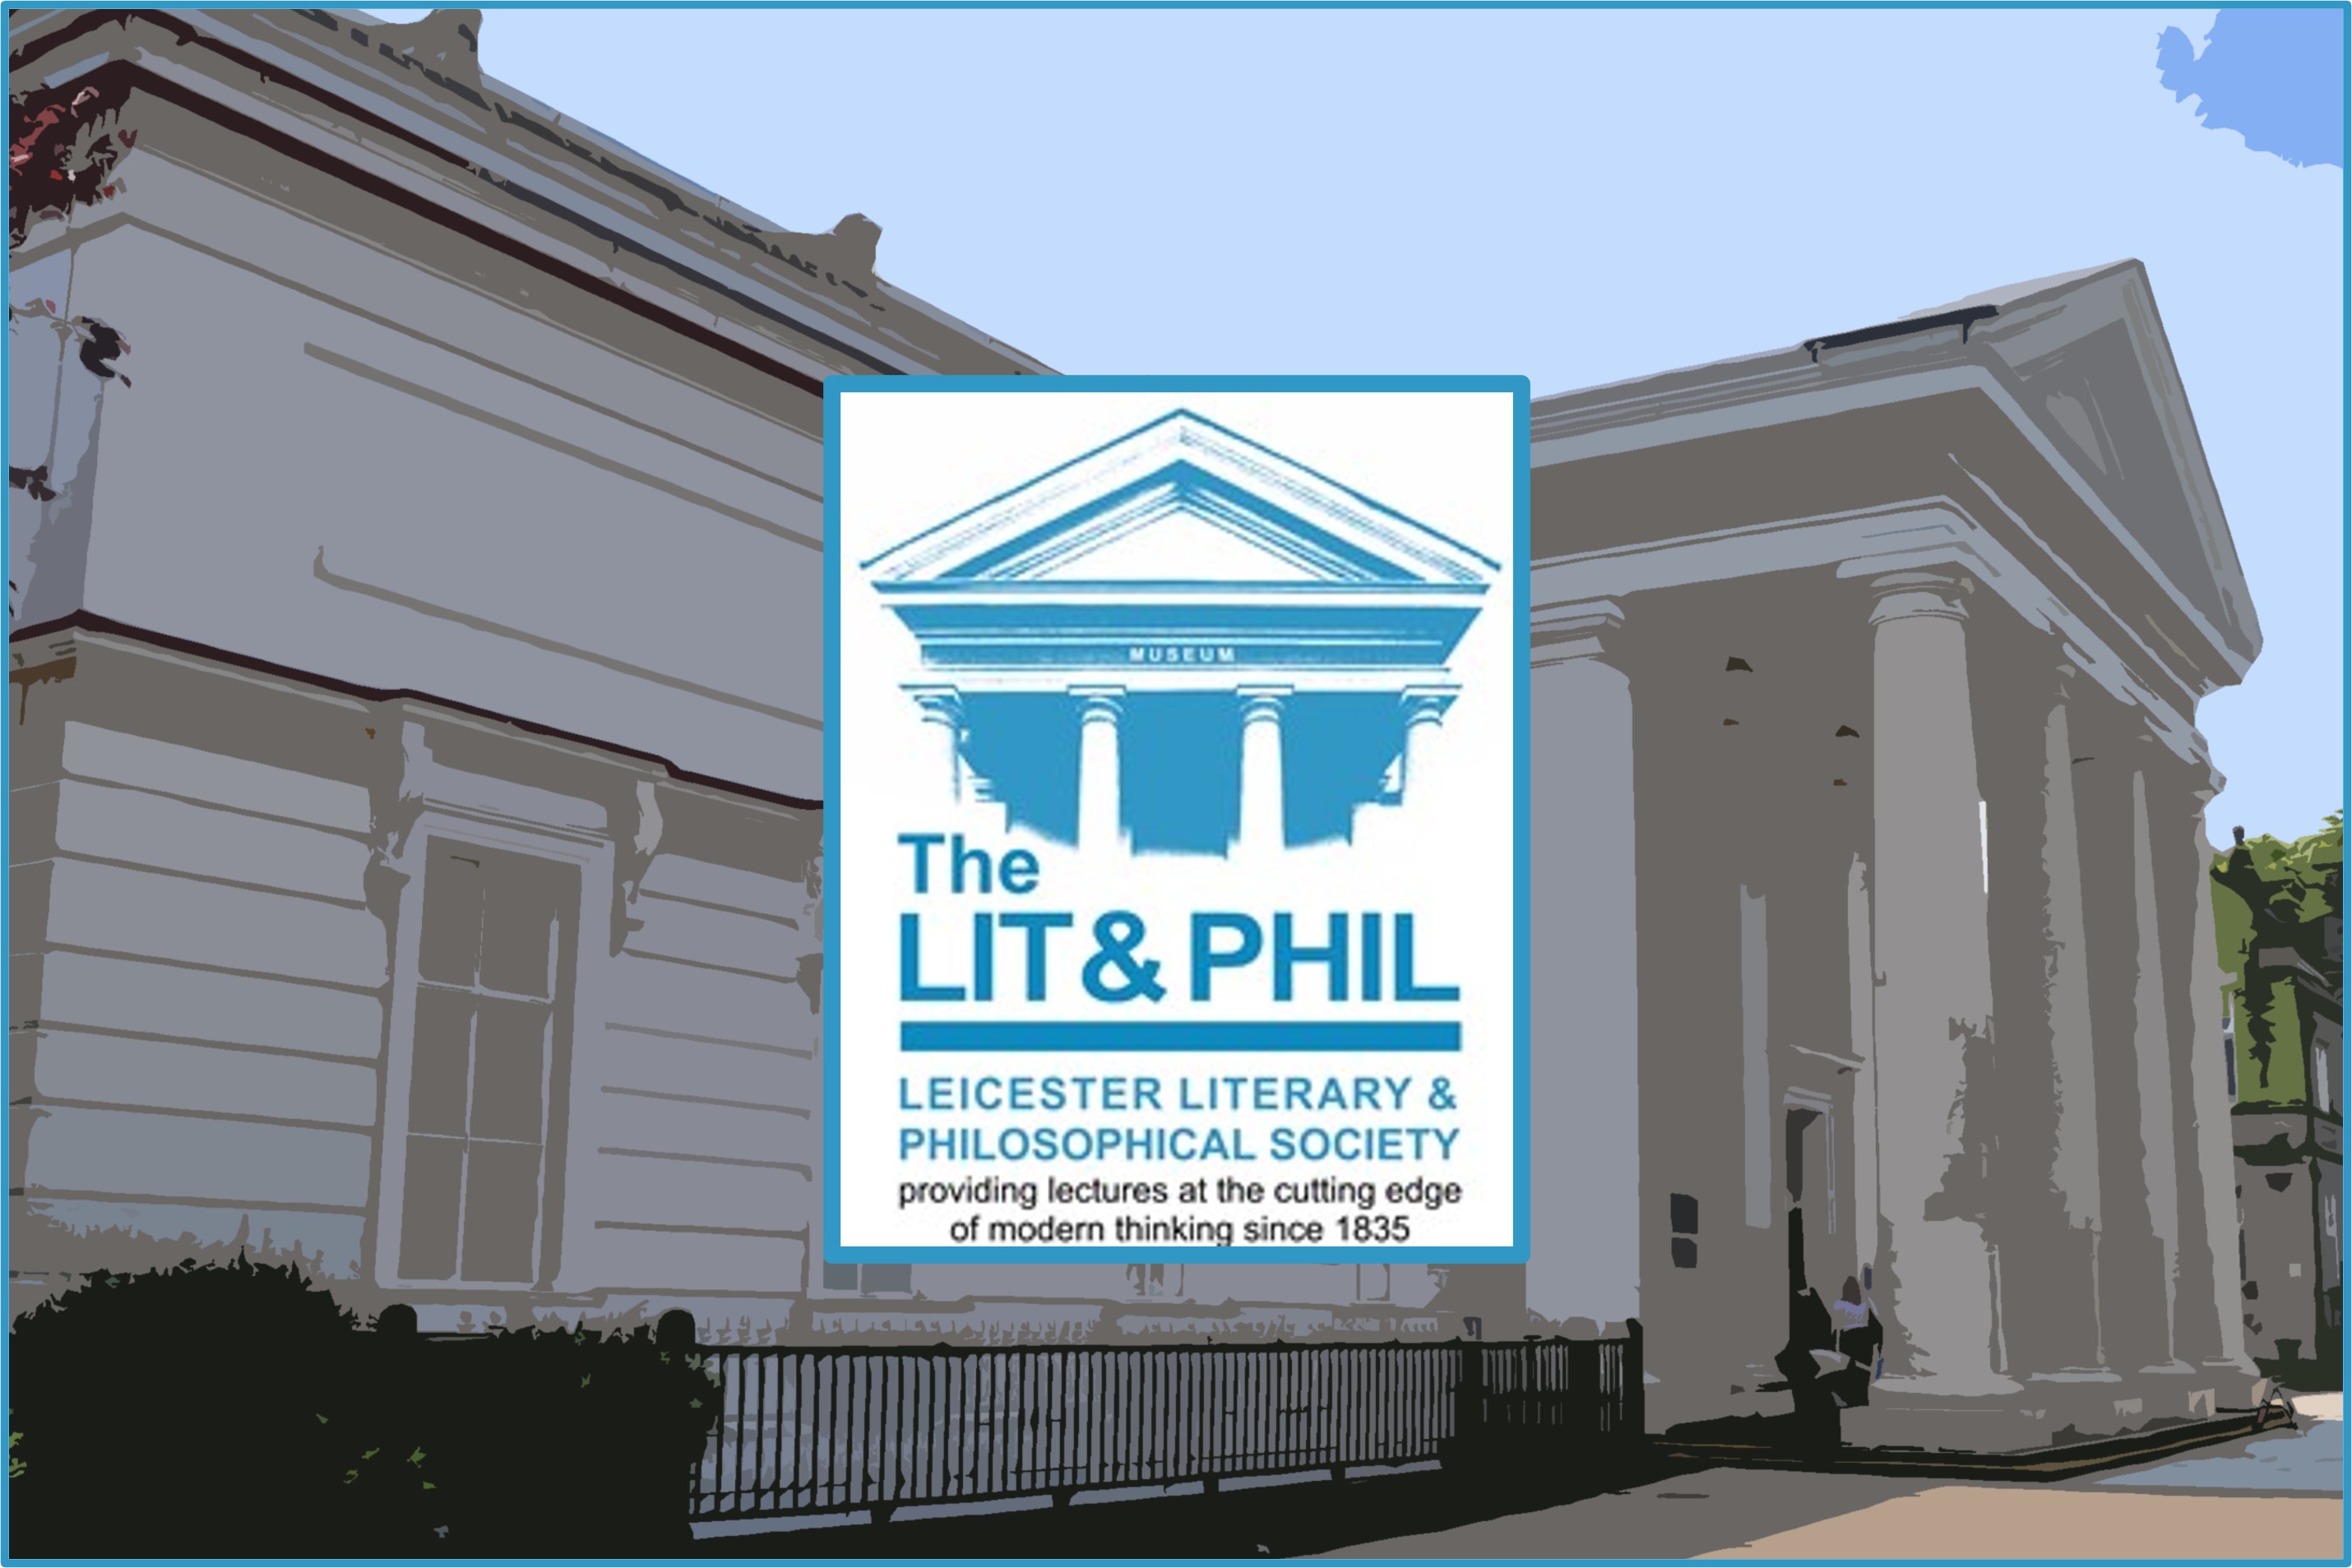 Evening Talks from the Lit & Phil Society